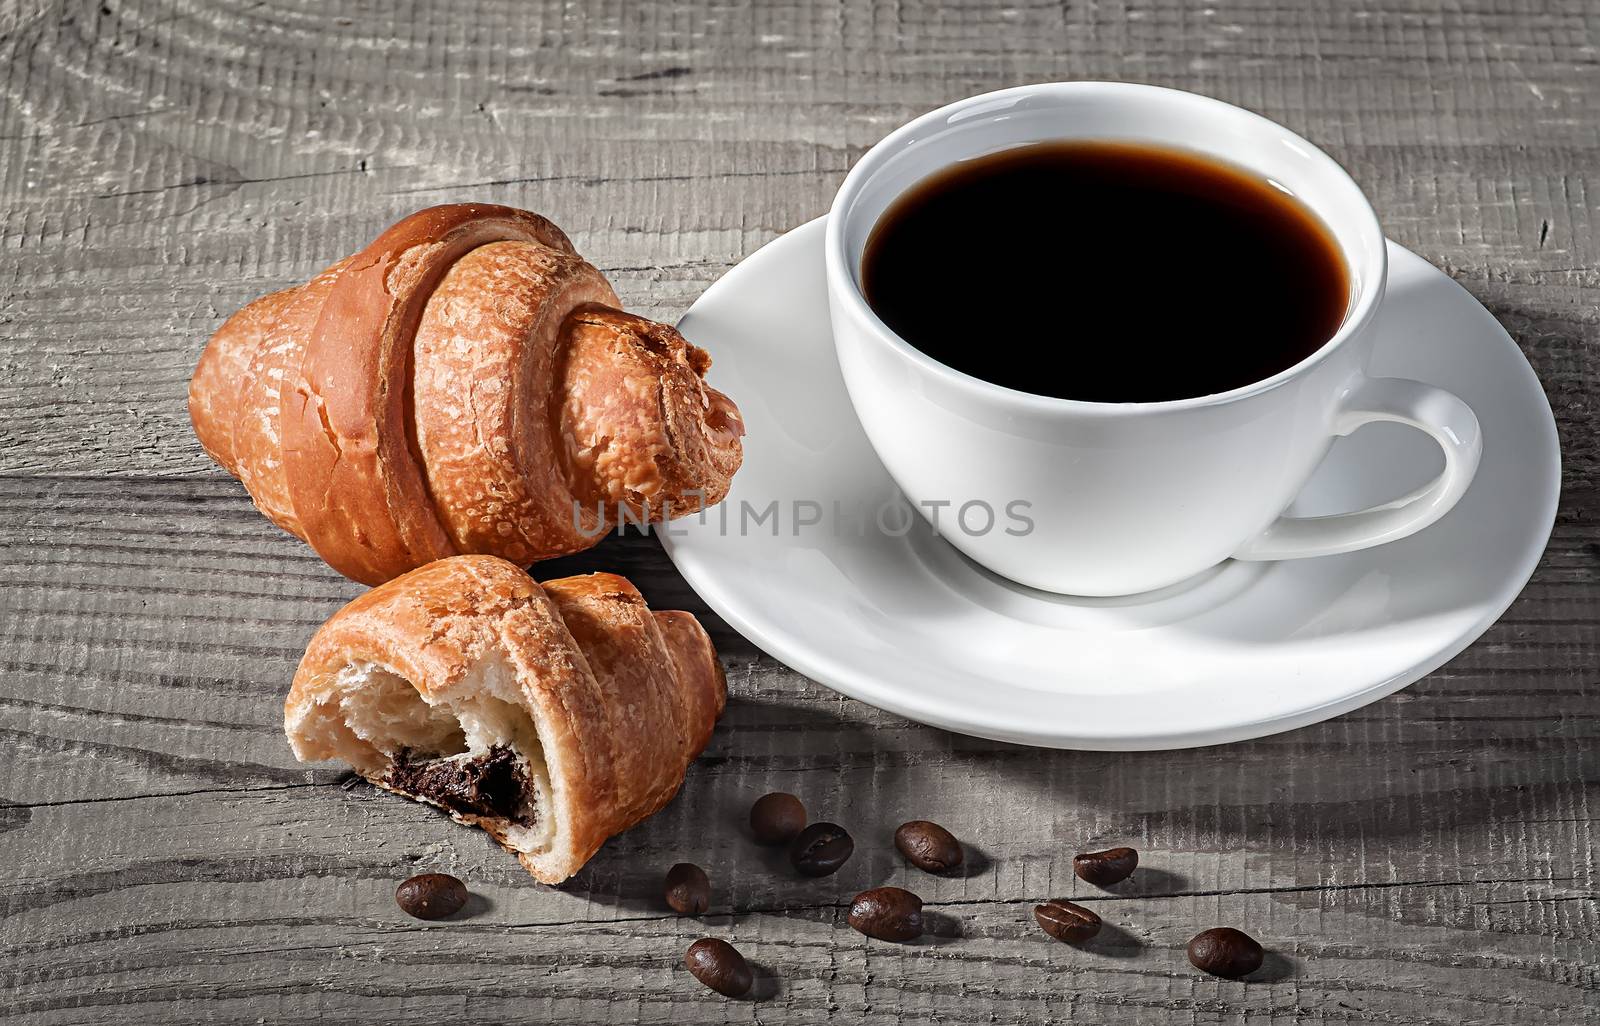 Coffee and croissants on a wooden table by Cipariss